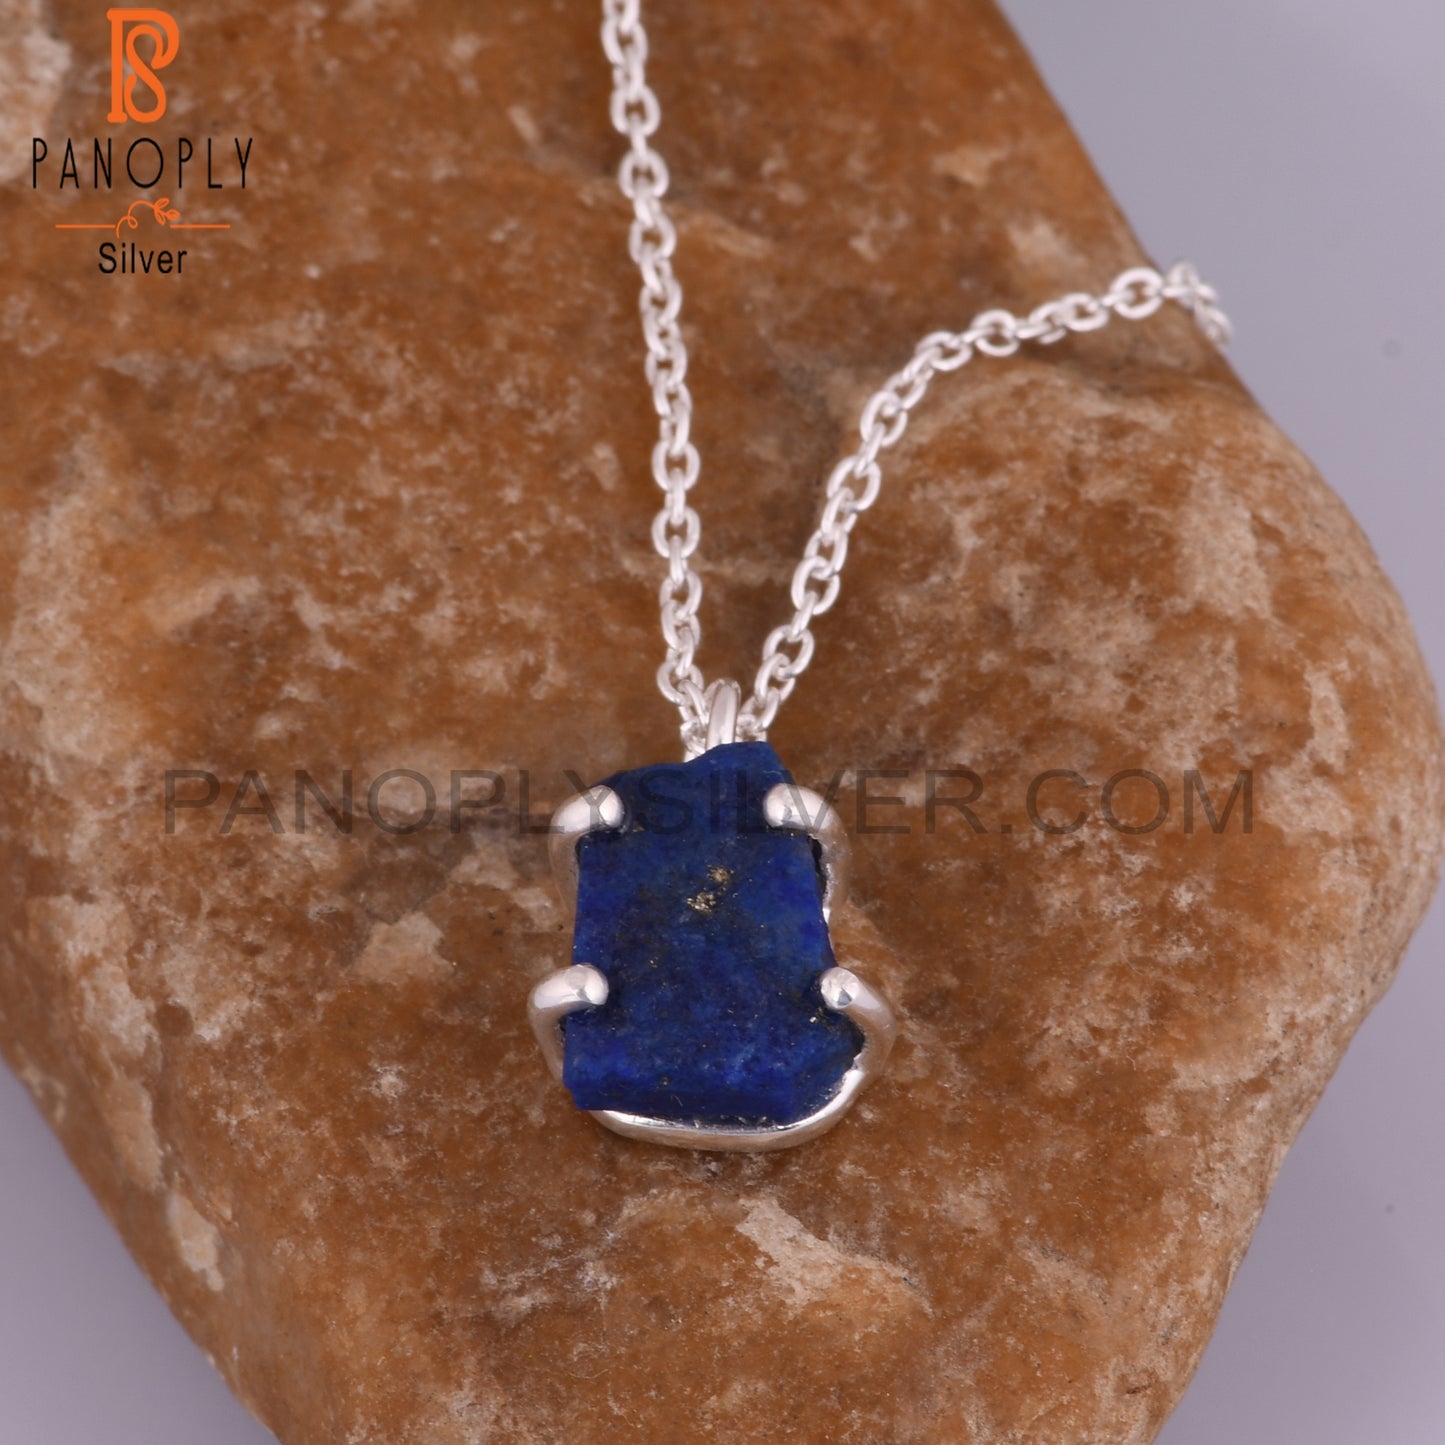 Lapis 925 Sterling Silver Necklace And Pendant Chain